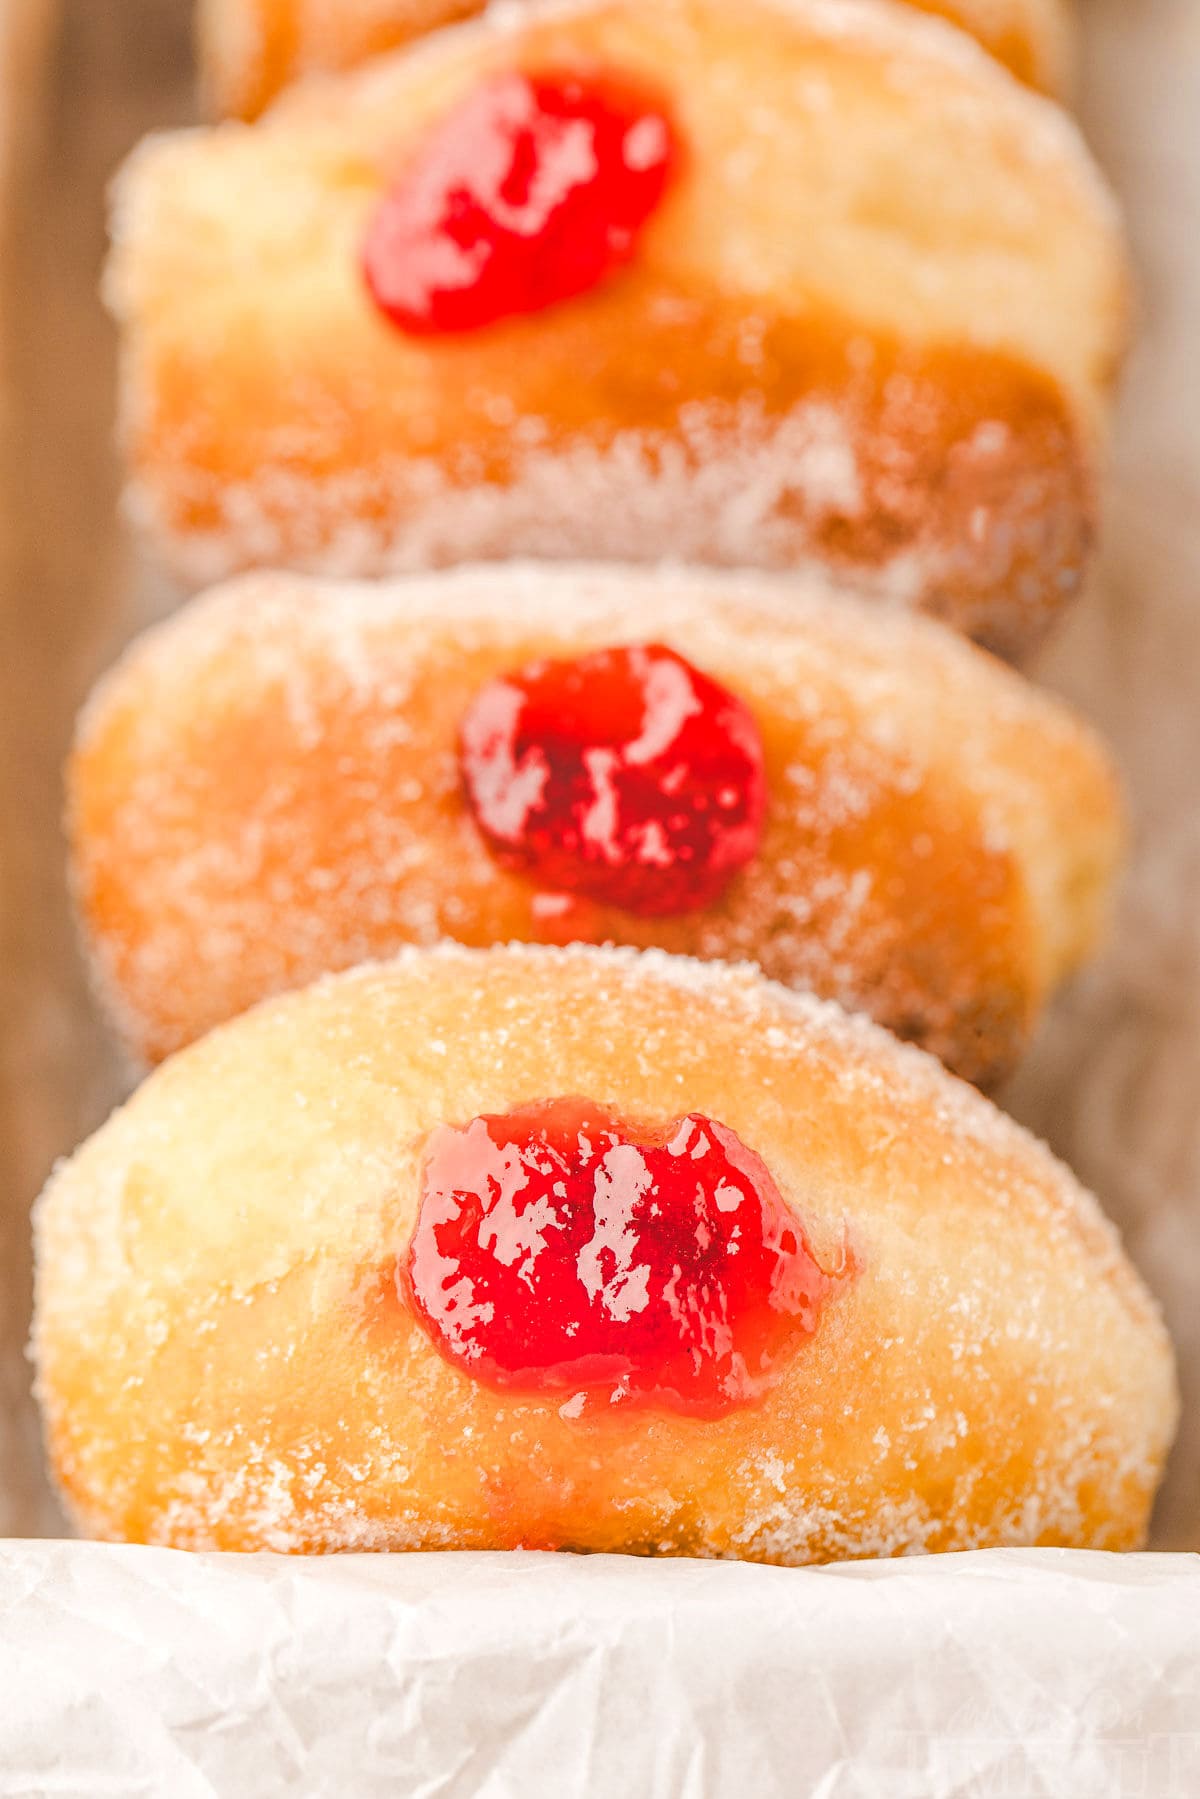 container with three jelly donuts rolled in sugar with red jam showing in the hole of the donut.